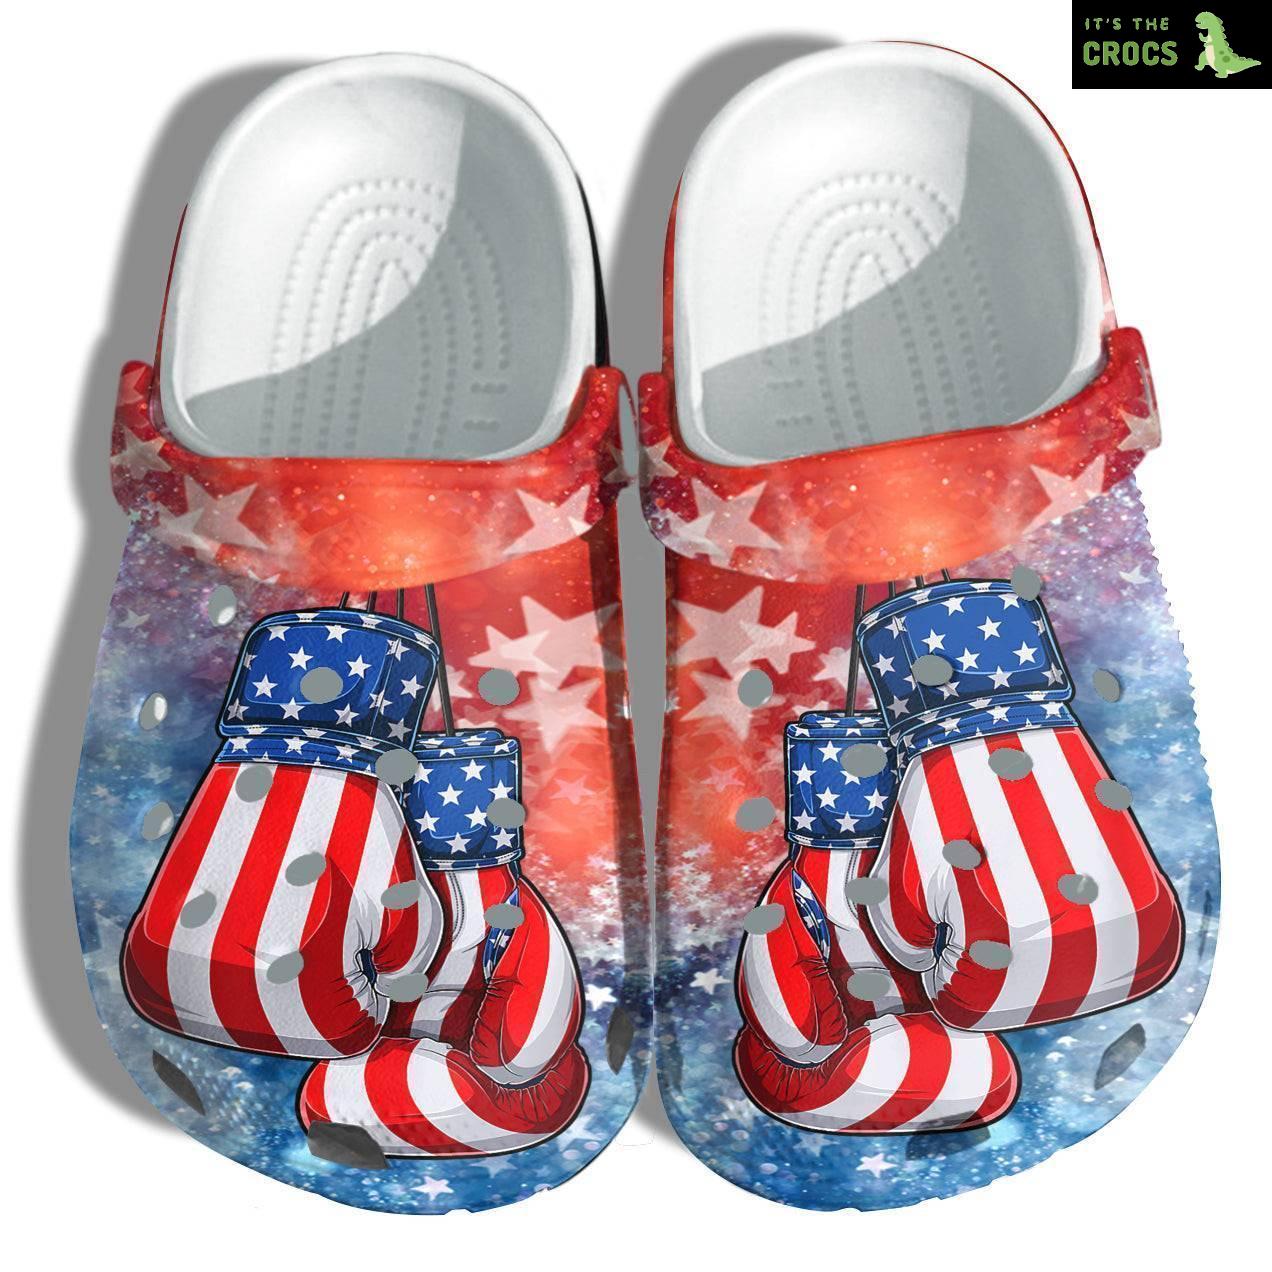 Boxing Fighter Breast Cancer America Flag Shoes Gift Women – Usa Pugilism Soldiers Veterans 4Th Of July Shoes Birthday Gift